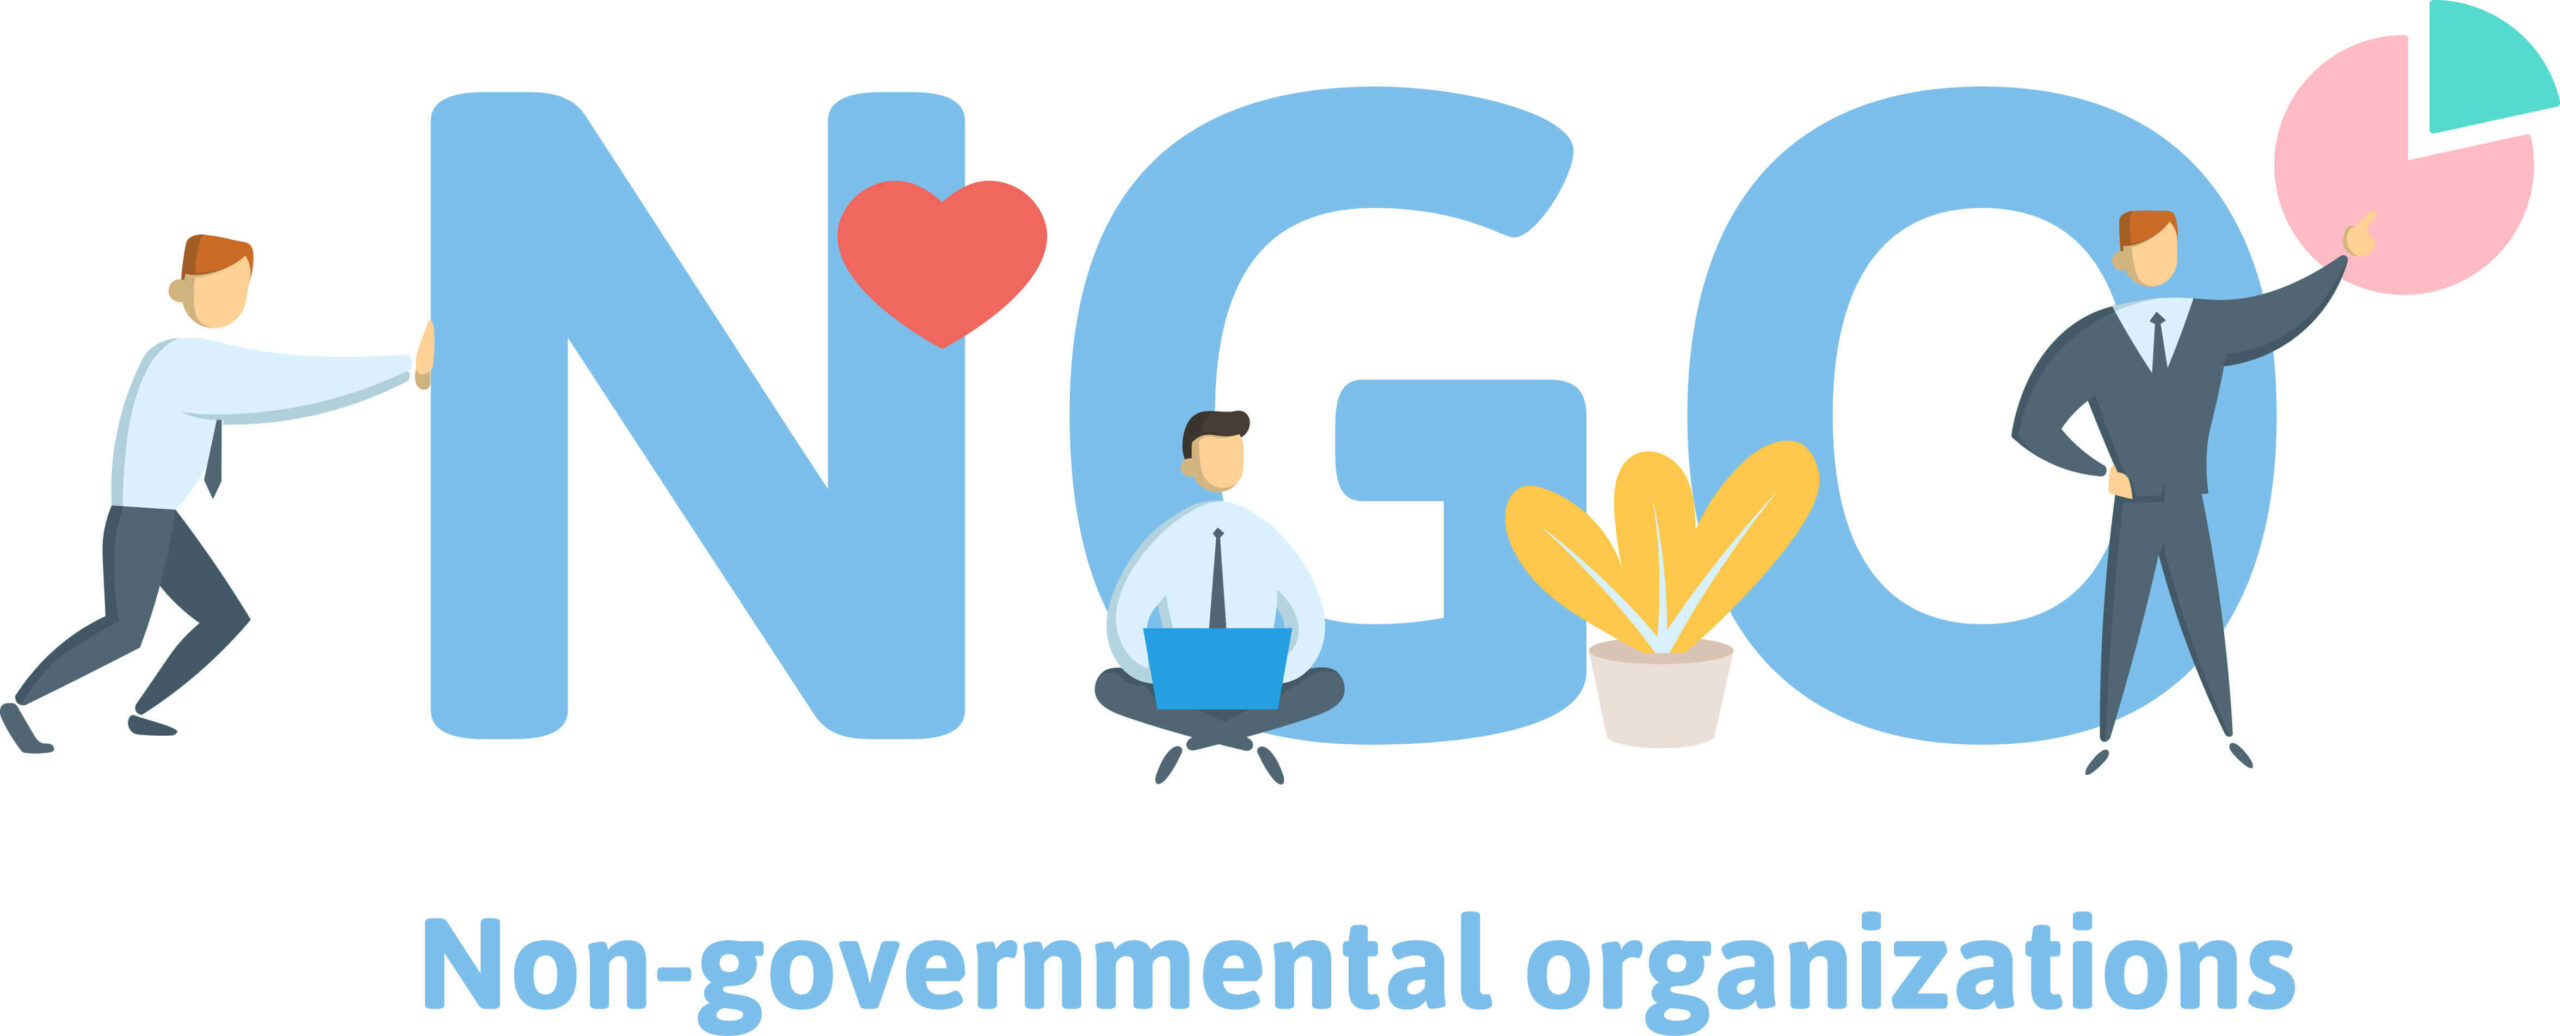 The differences between annuals reports for NGOs and other corporate reports is vast.